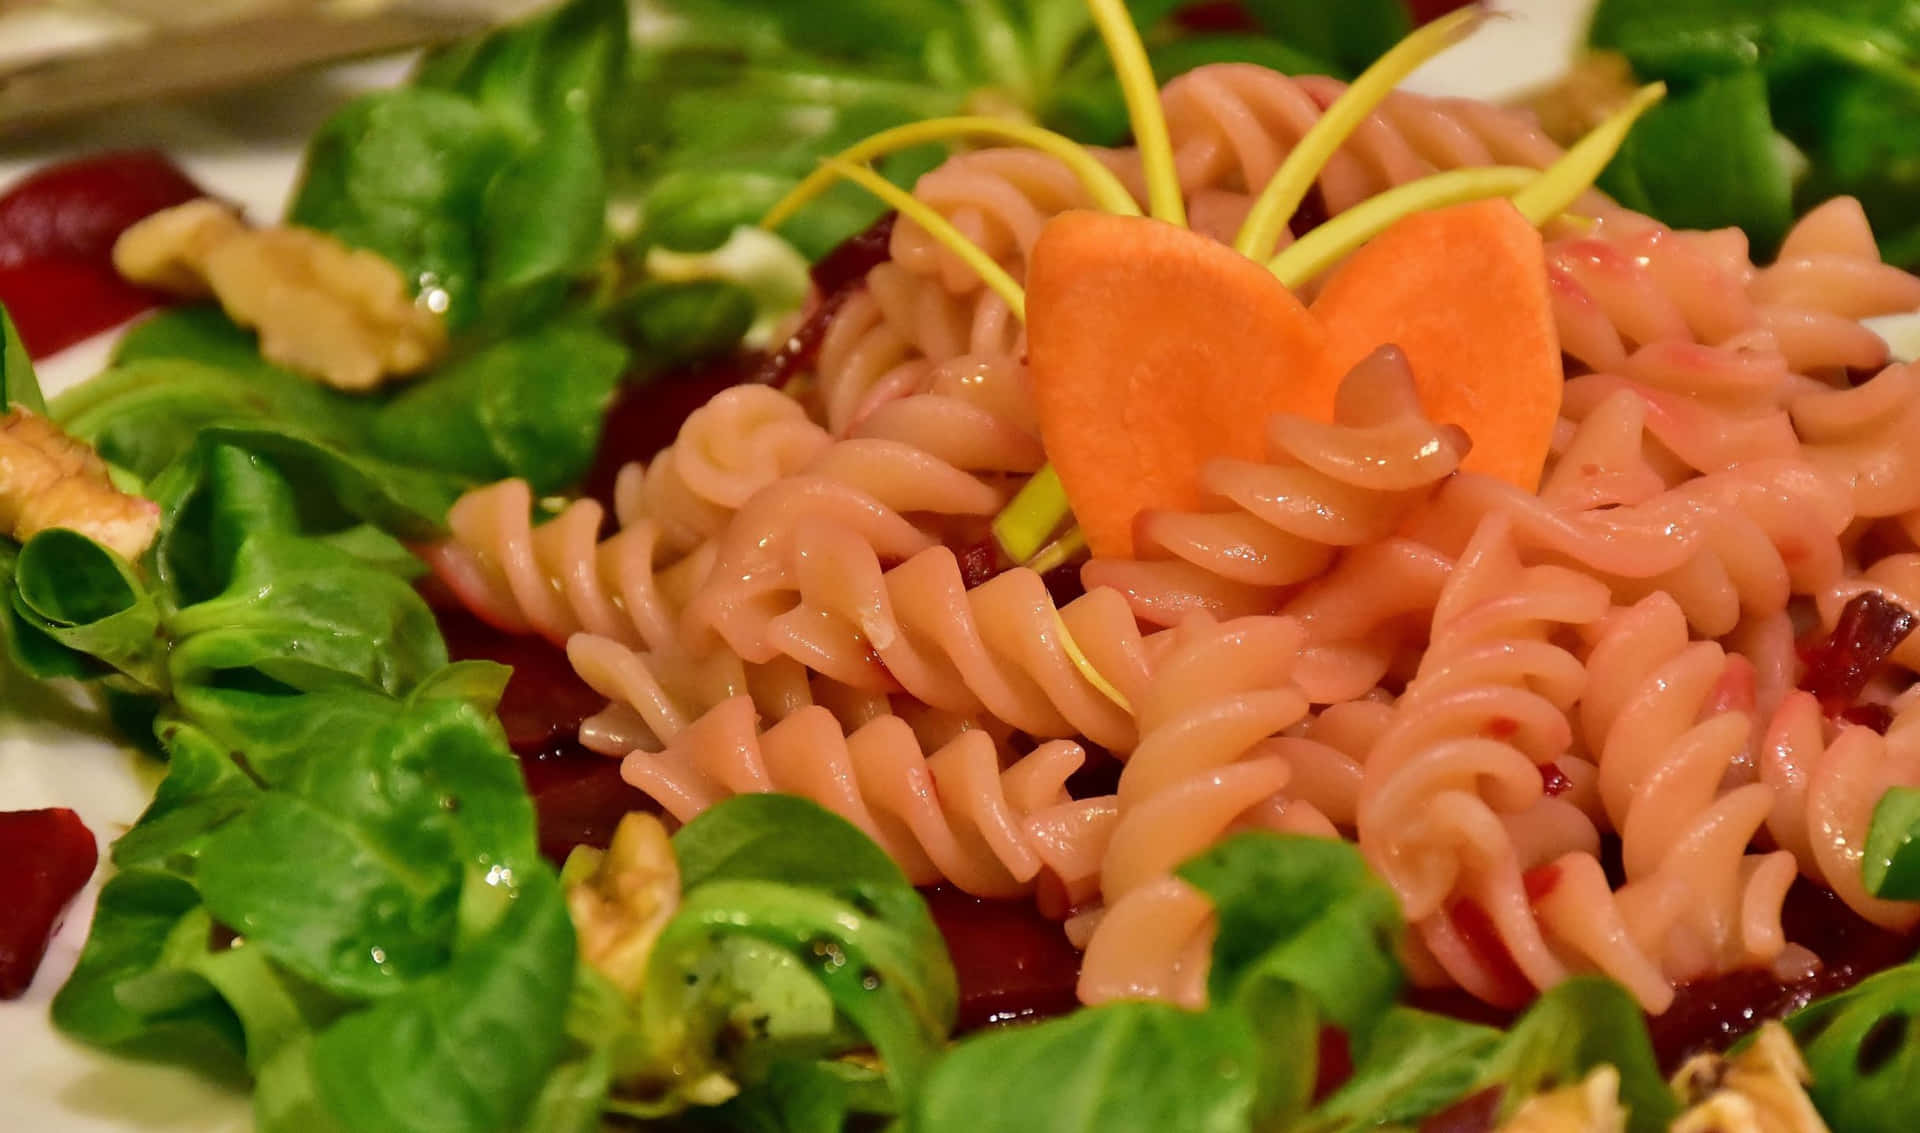 A Plate Of Pasta With Carrots, Walnuts And Cranberries